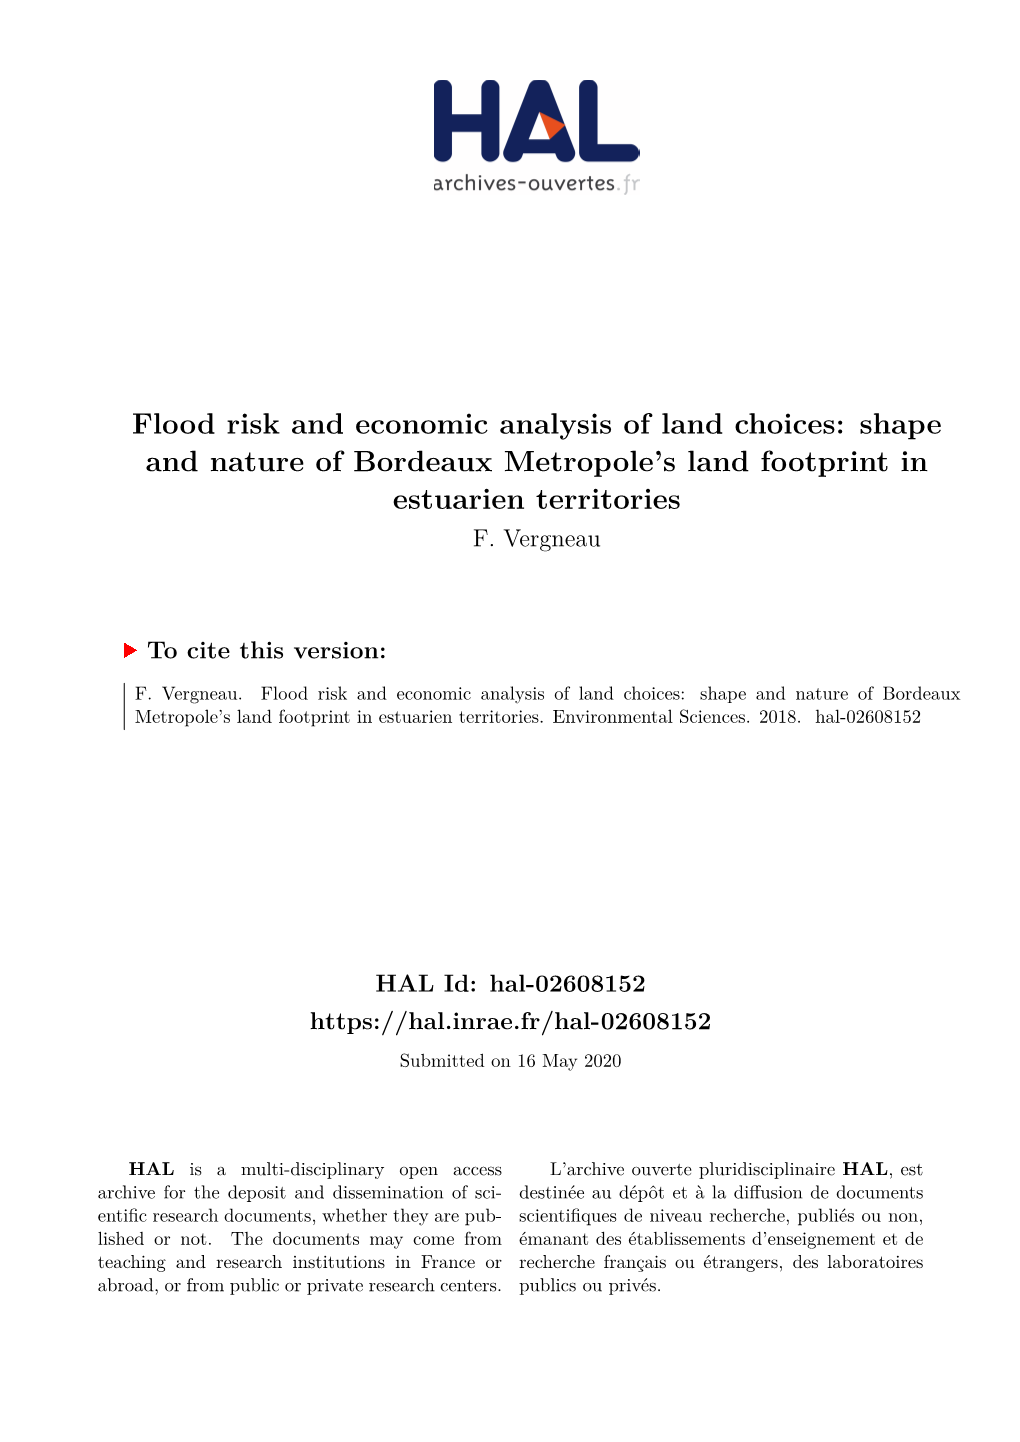 Flood Risk and Economic Analysis of Land Choices: Shape and Nature of Bordeaux Metropole’S Land Footprint in Estuarien Territories F